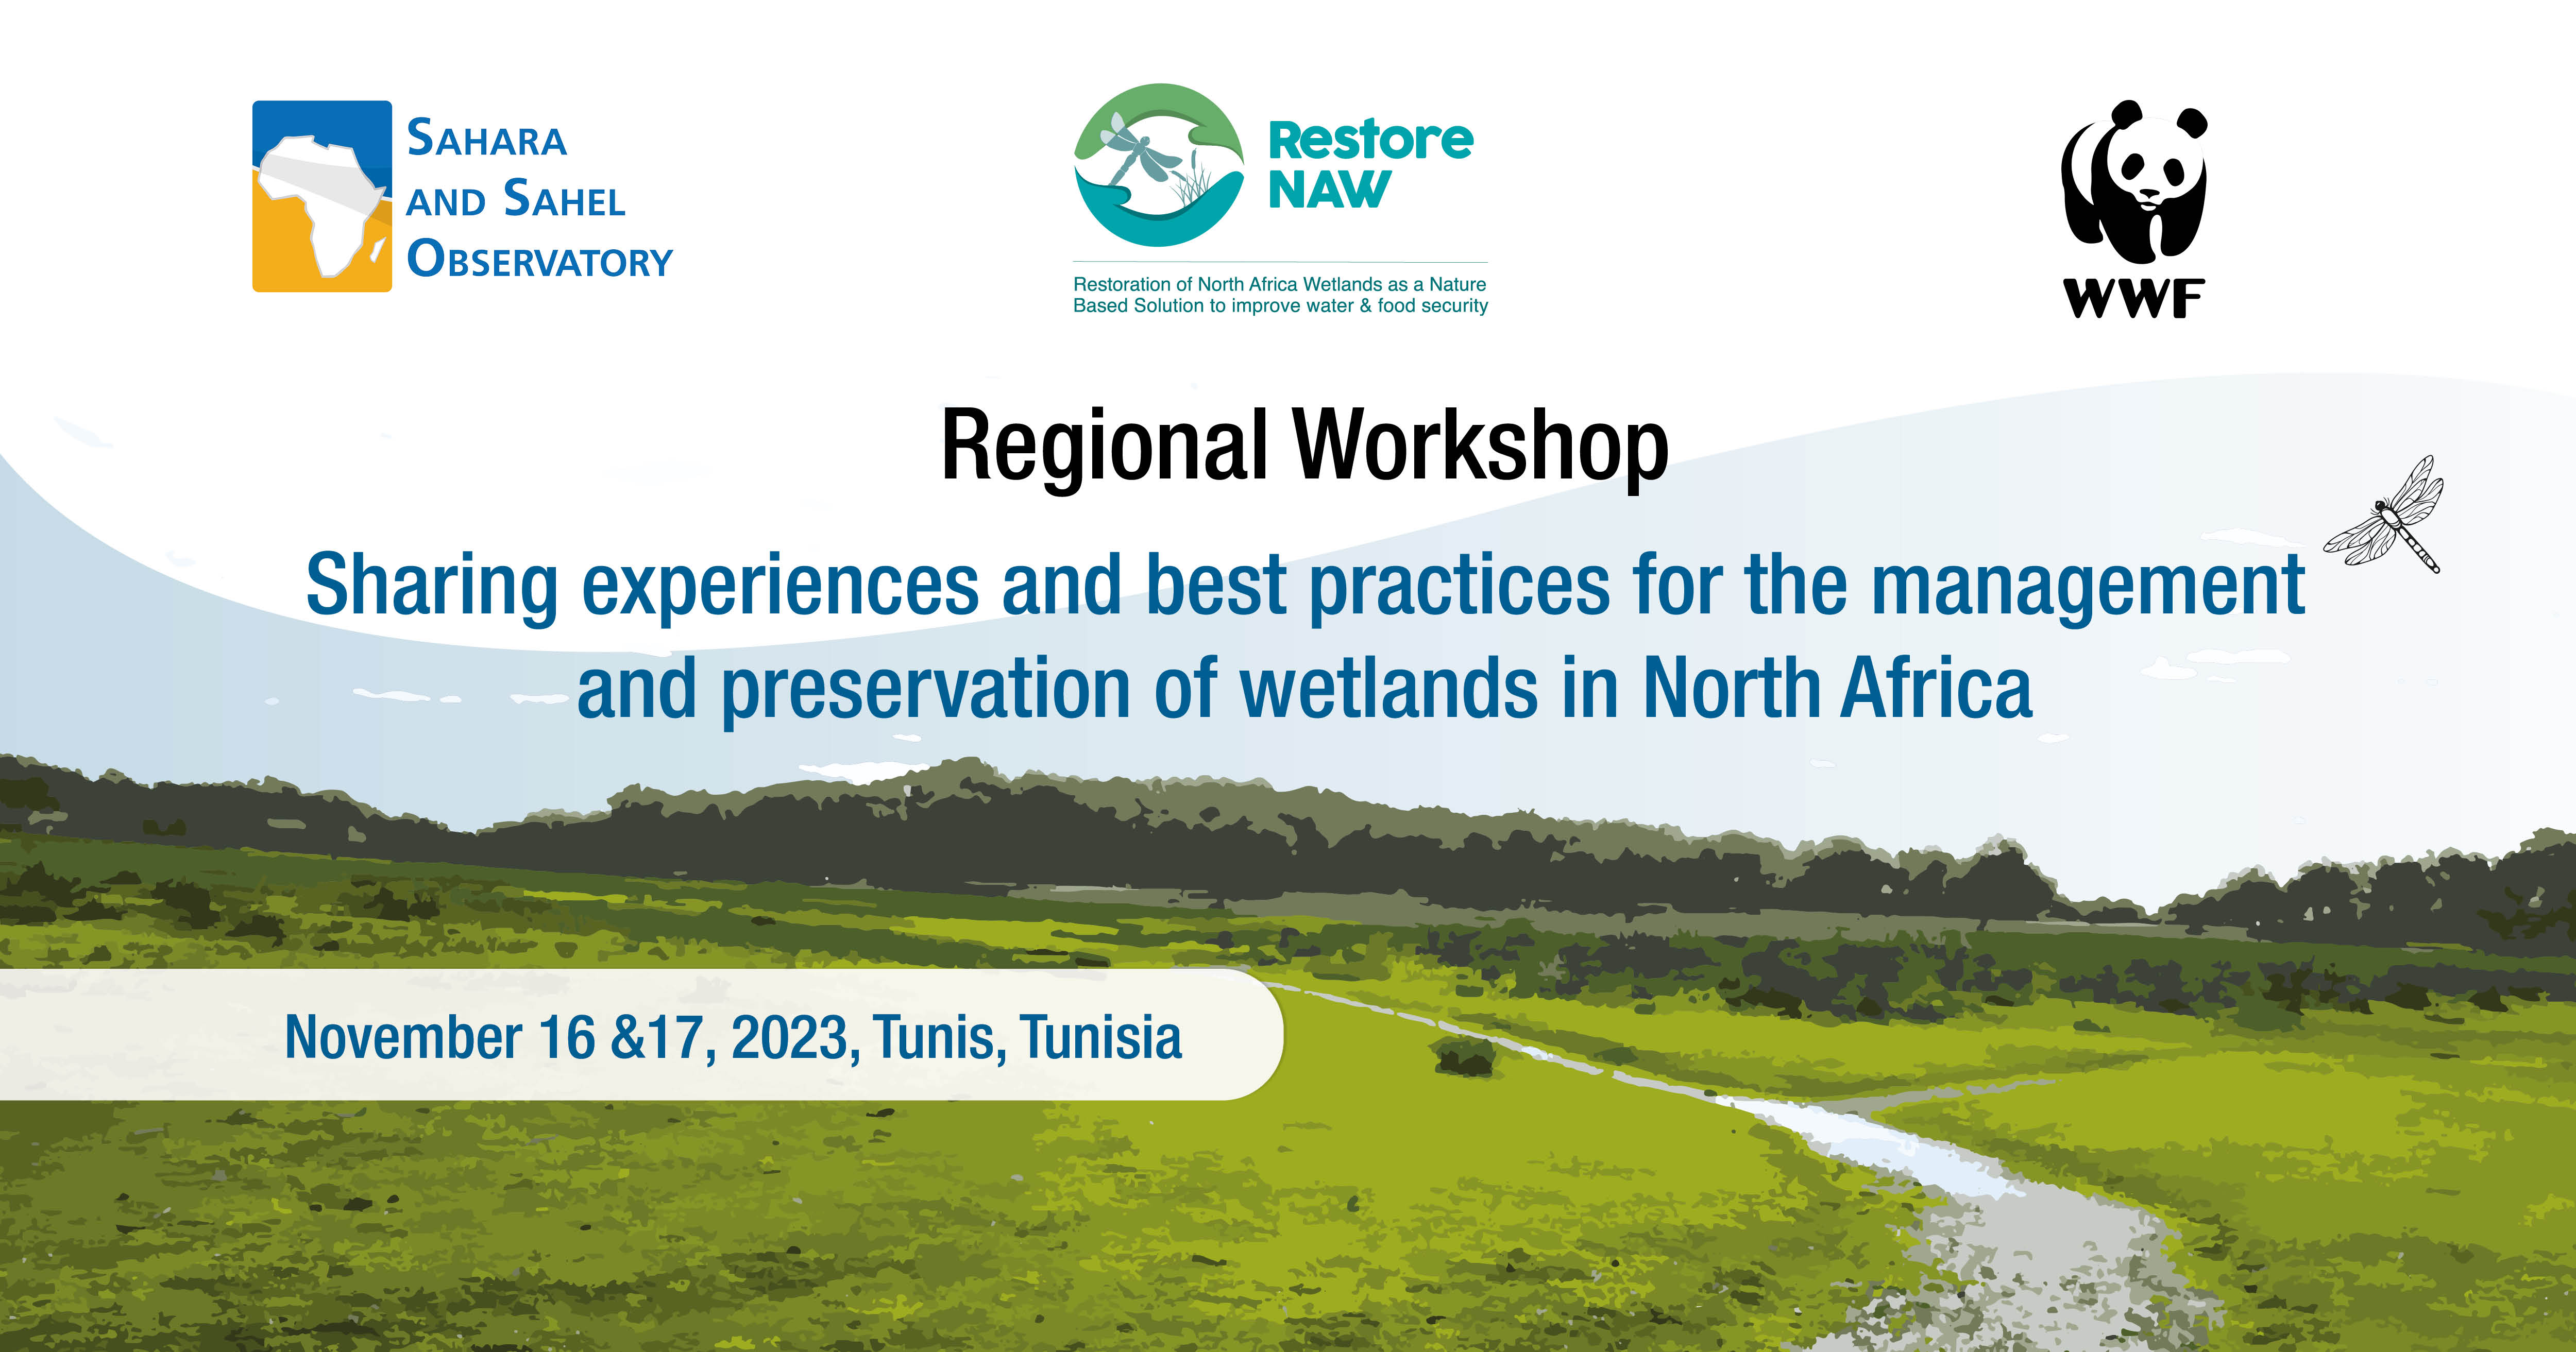  Commitments for Synergy between Key Stakeholders and Advocacy for the Restoration of Wetlands in North Africa, as a nature-based solution